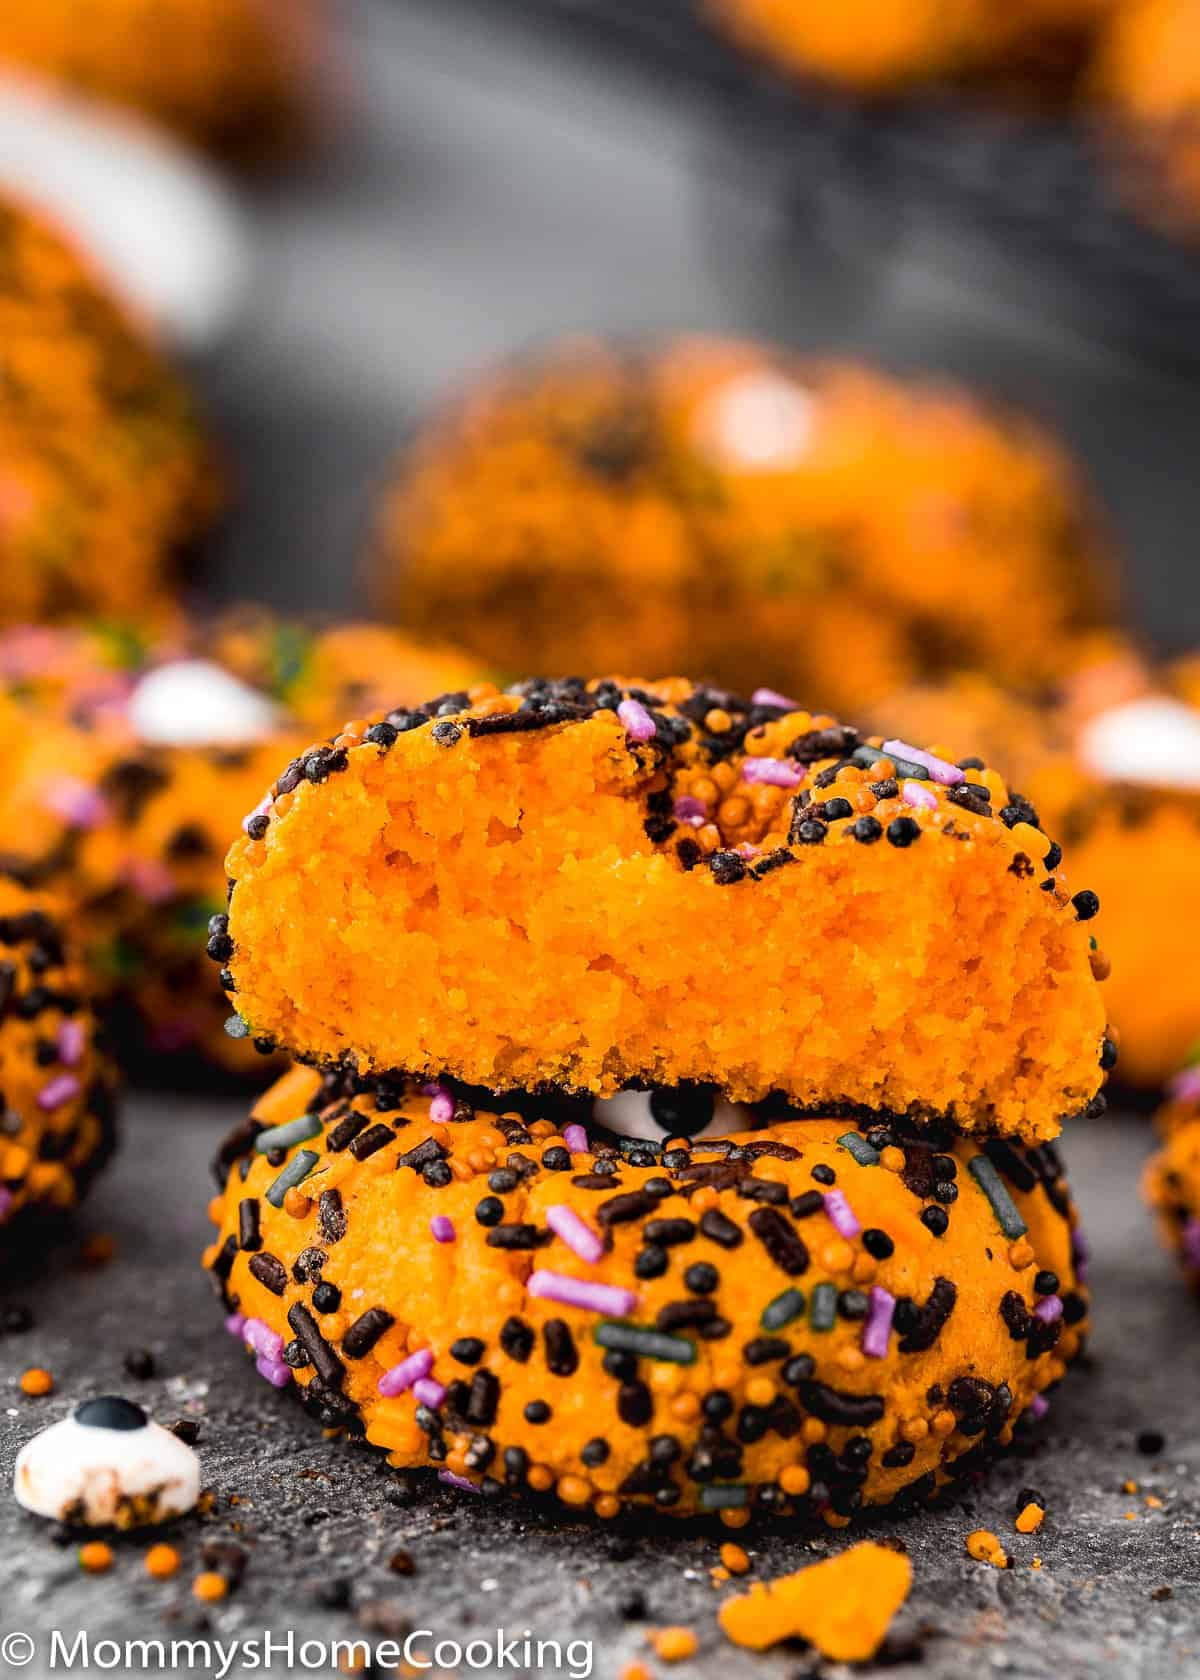 Easy Eggless Halloween Cookies showing the inside texture